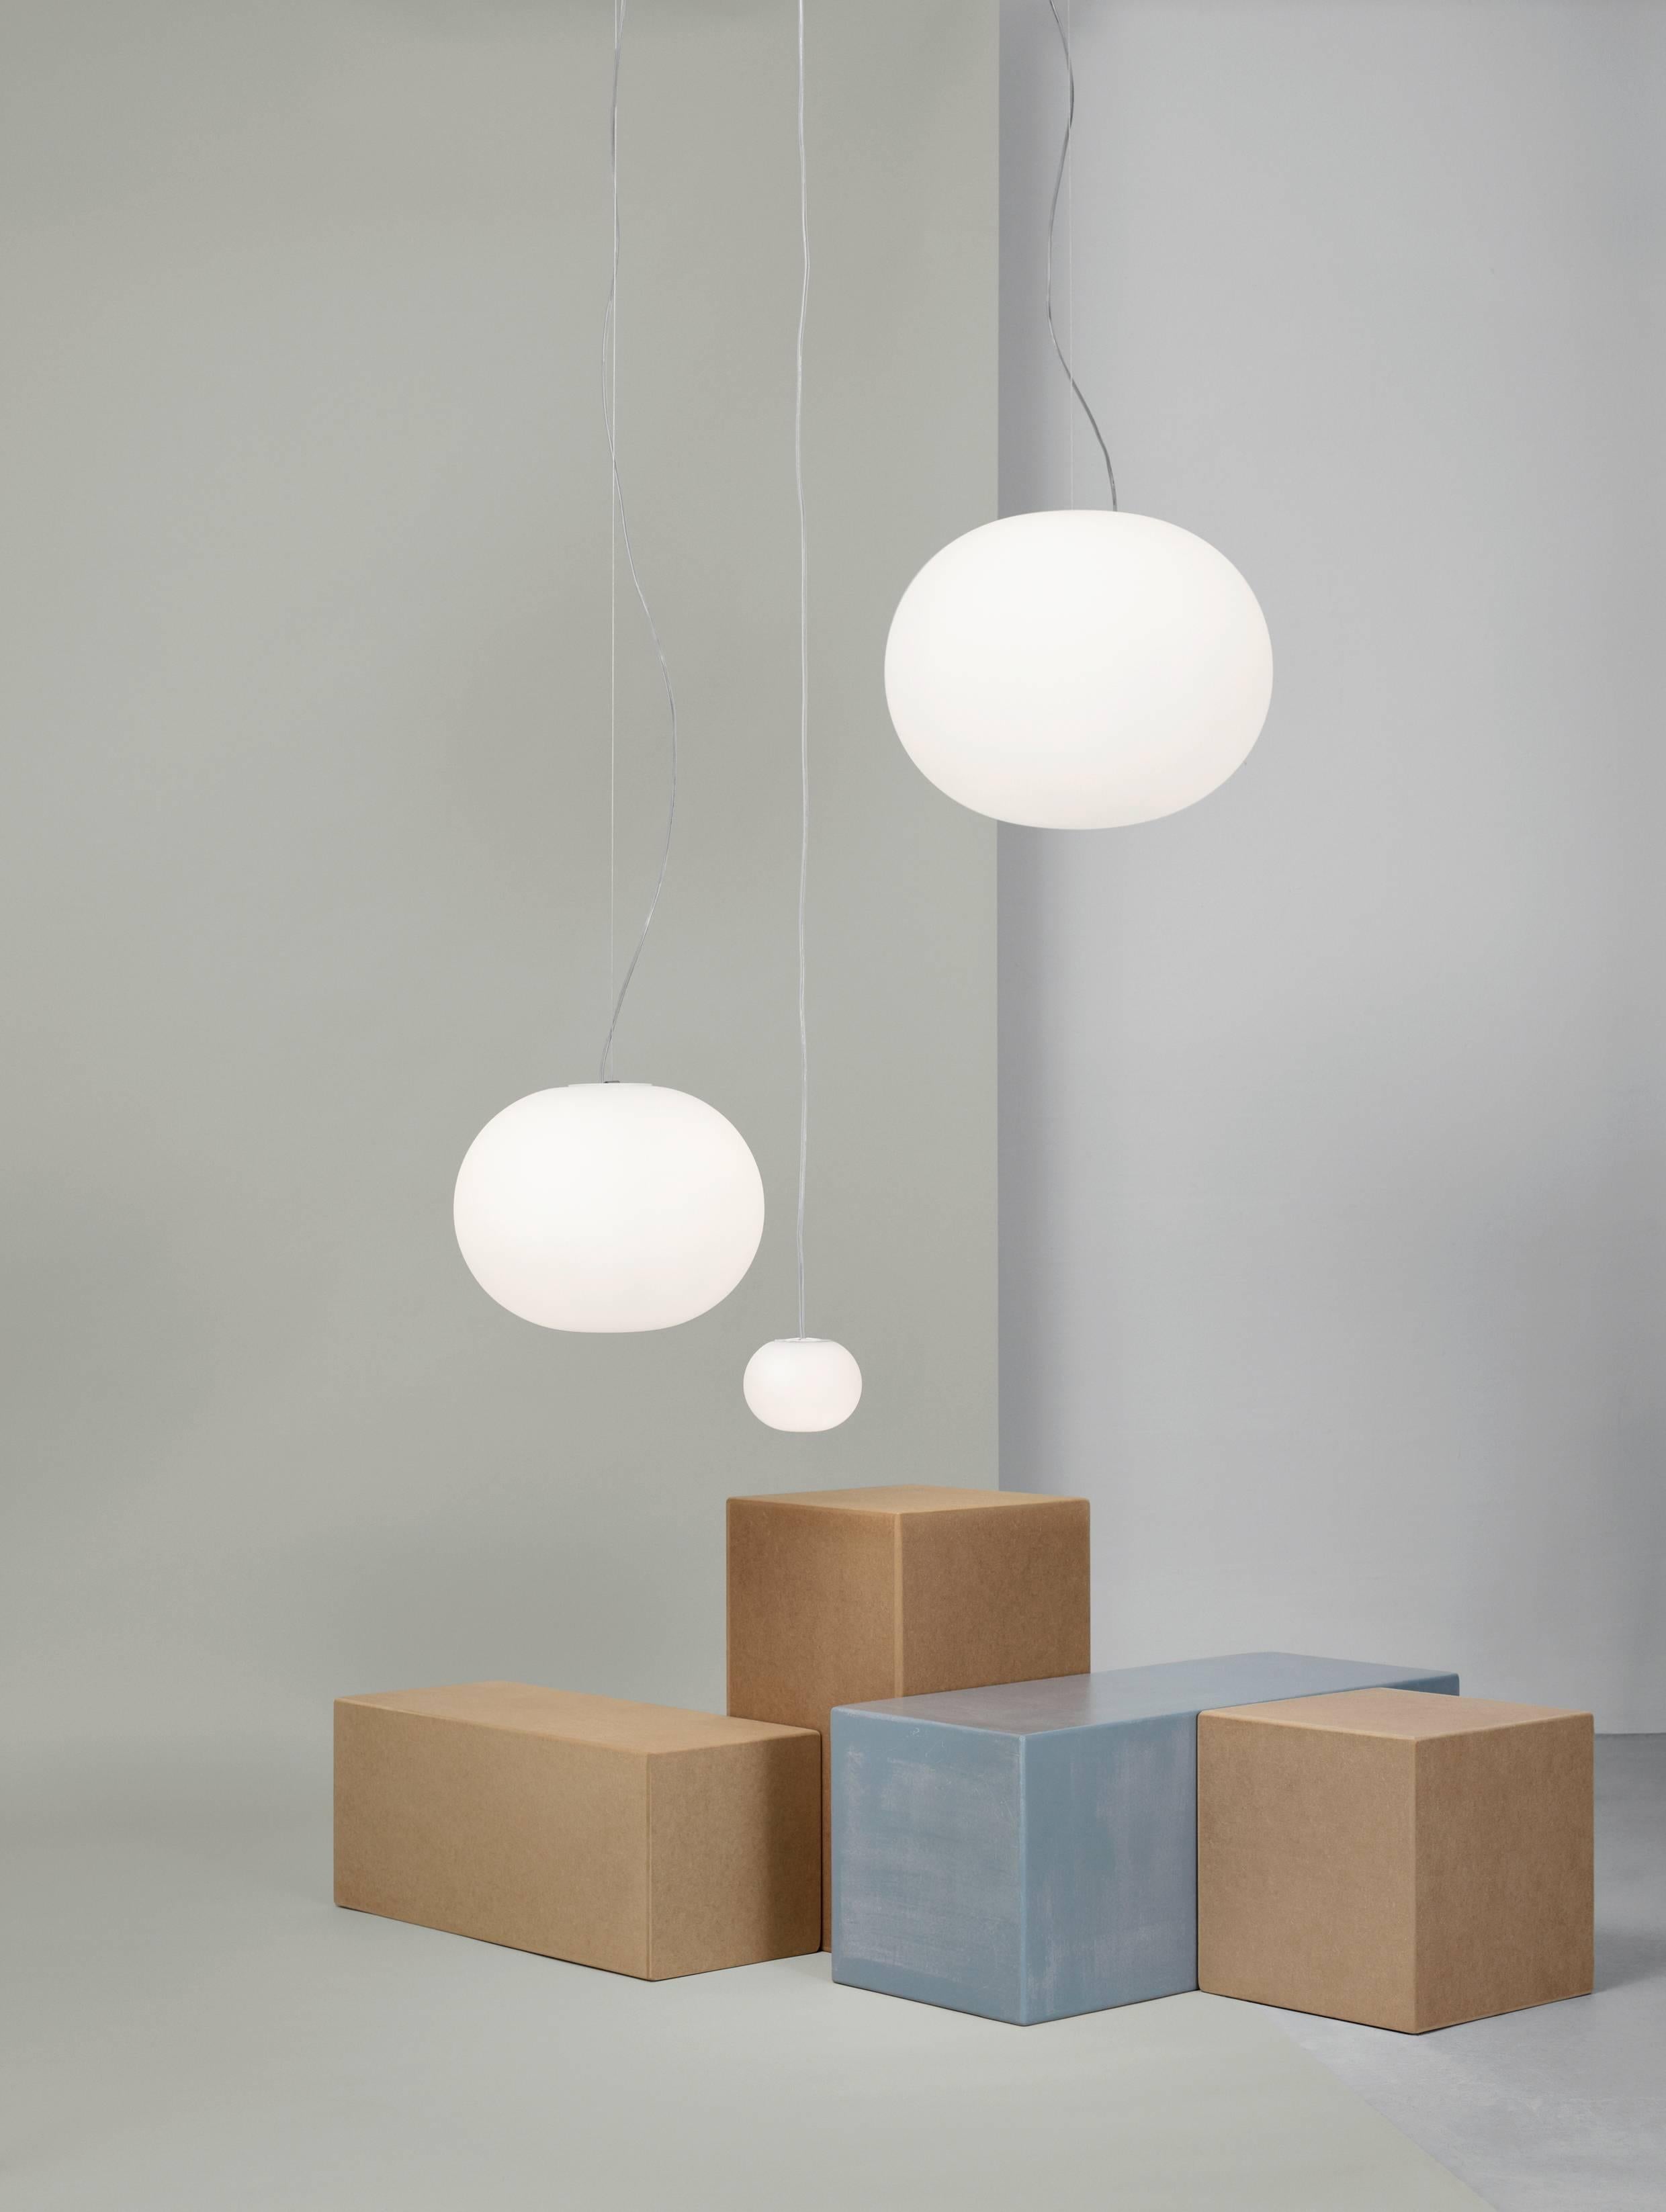 FLOS Glo-Ball S1 Halogen Pendant Light by Jasper Morrison
Marrying the functional with the otherworldly, the Glo-Ball S by Jasper Morrison is a remarkably versatile design that punctuates any room it is featured in. Its diffuser is made of